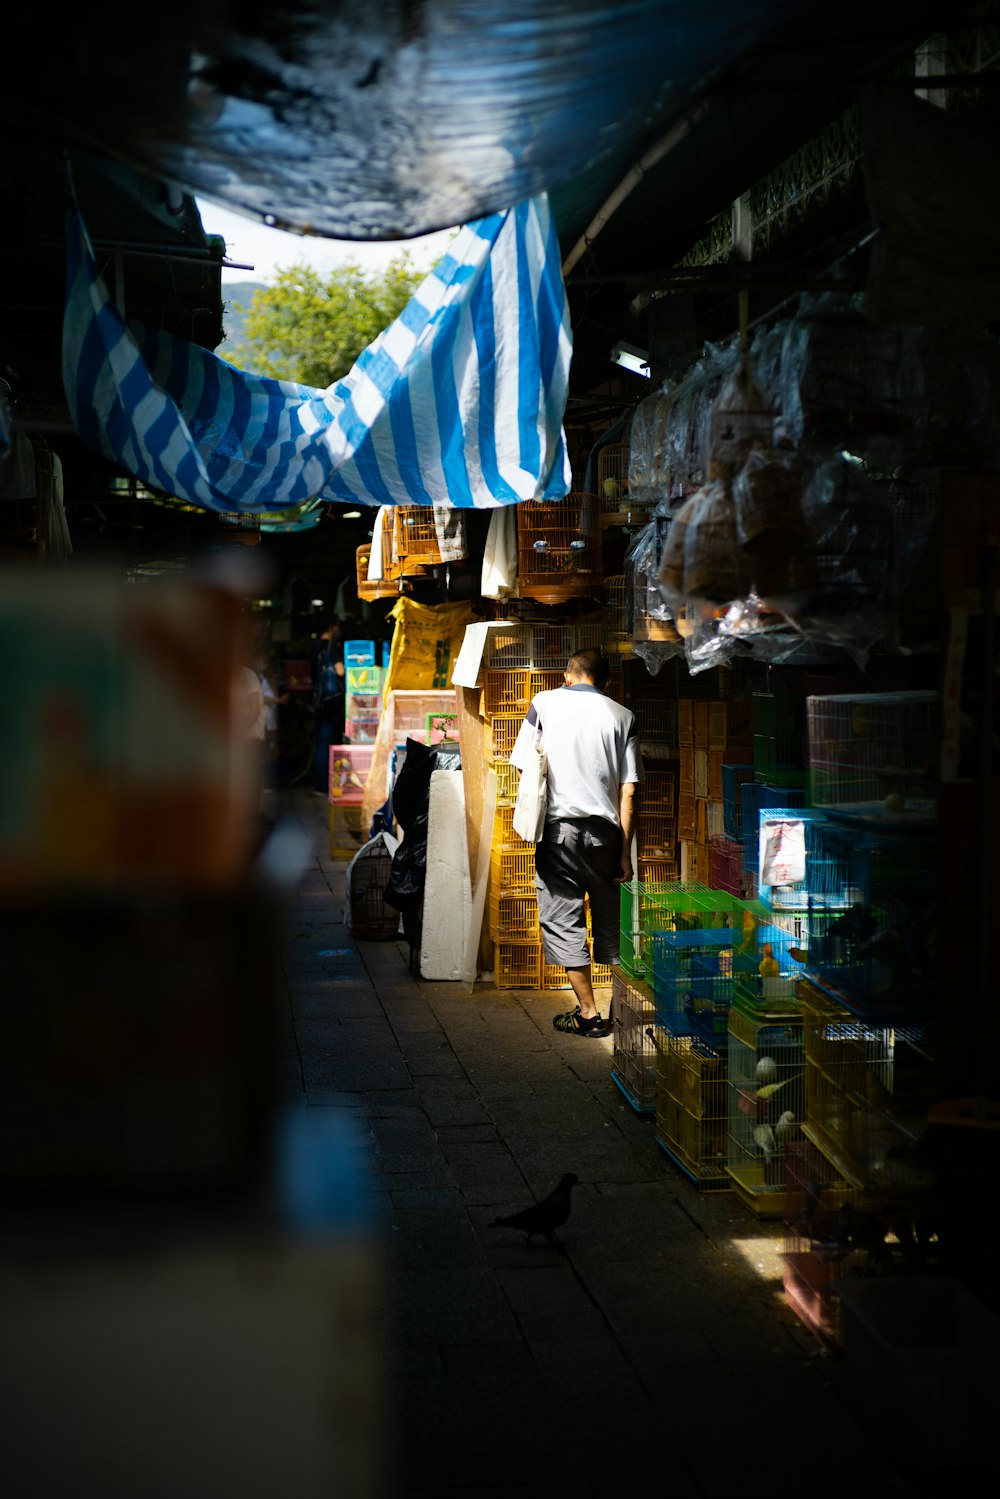 a man is standing in a market with a blue and white striped umbrella